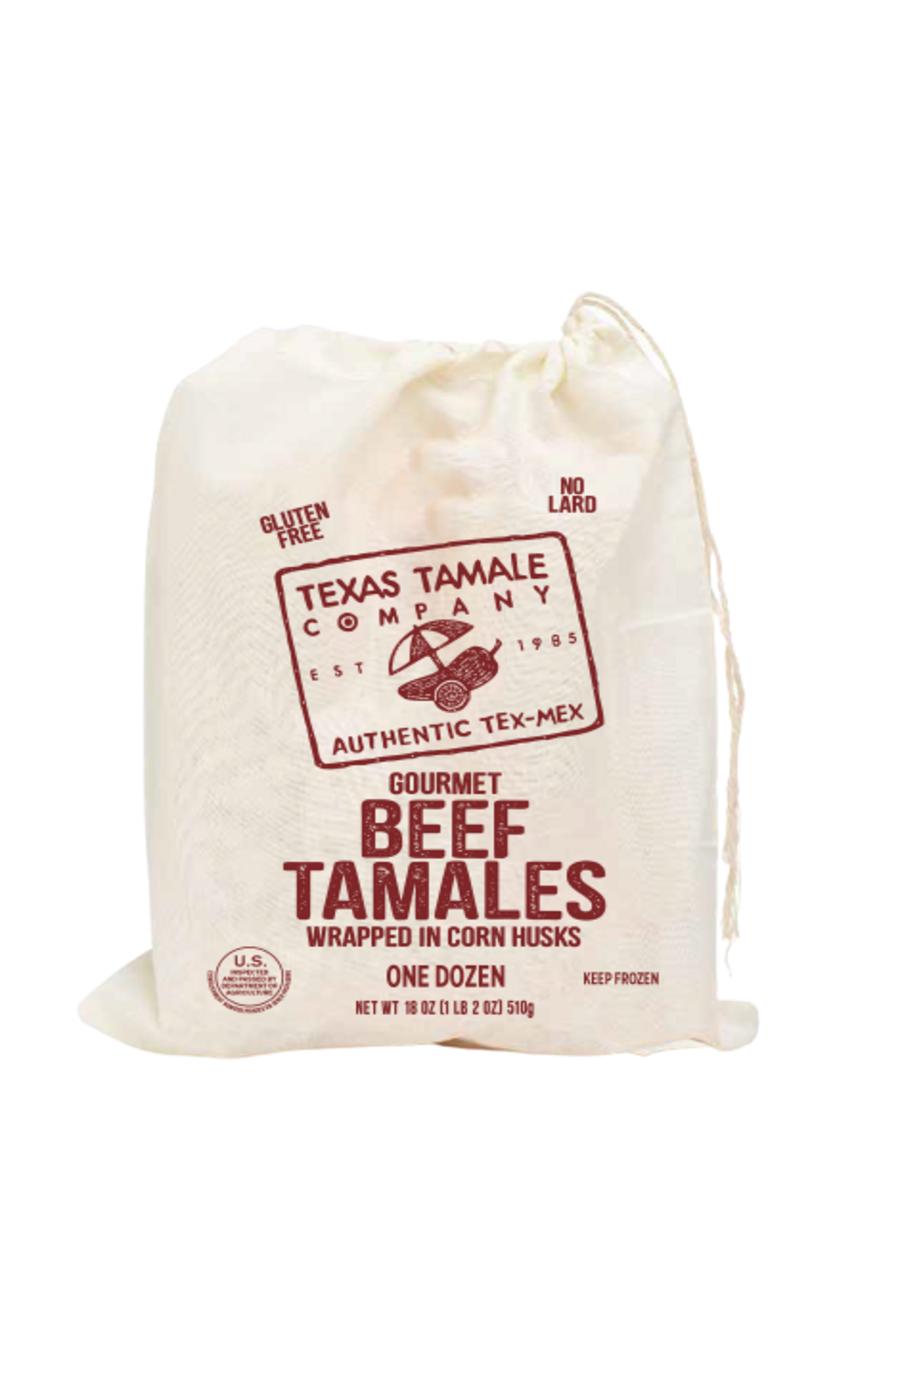 Texas Tamale Company Gourmet Beef Tamales; image 1 of 3